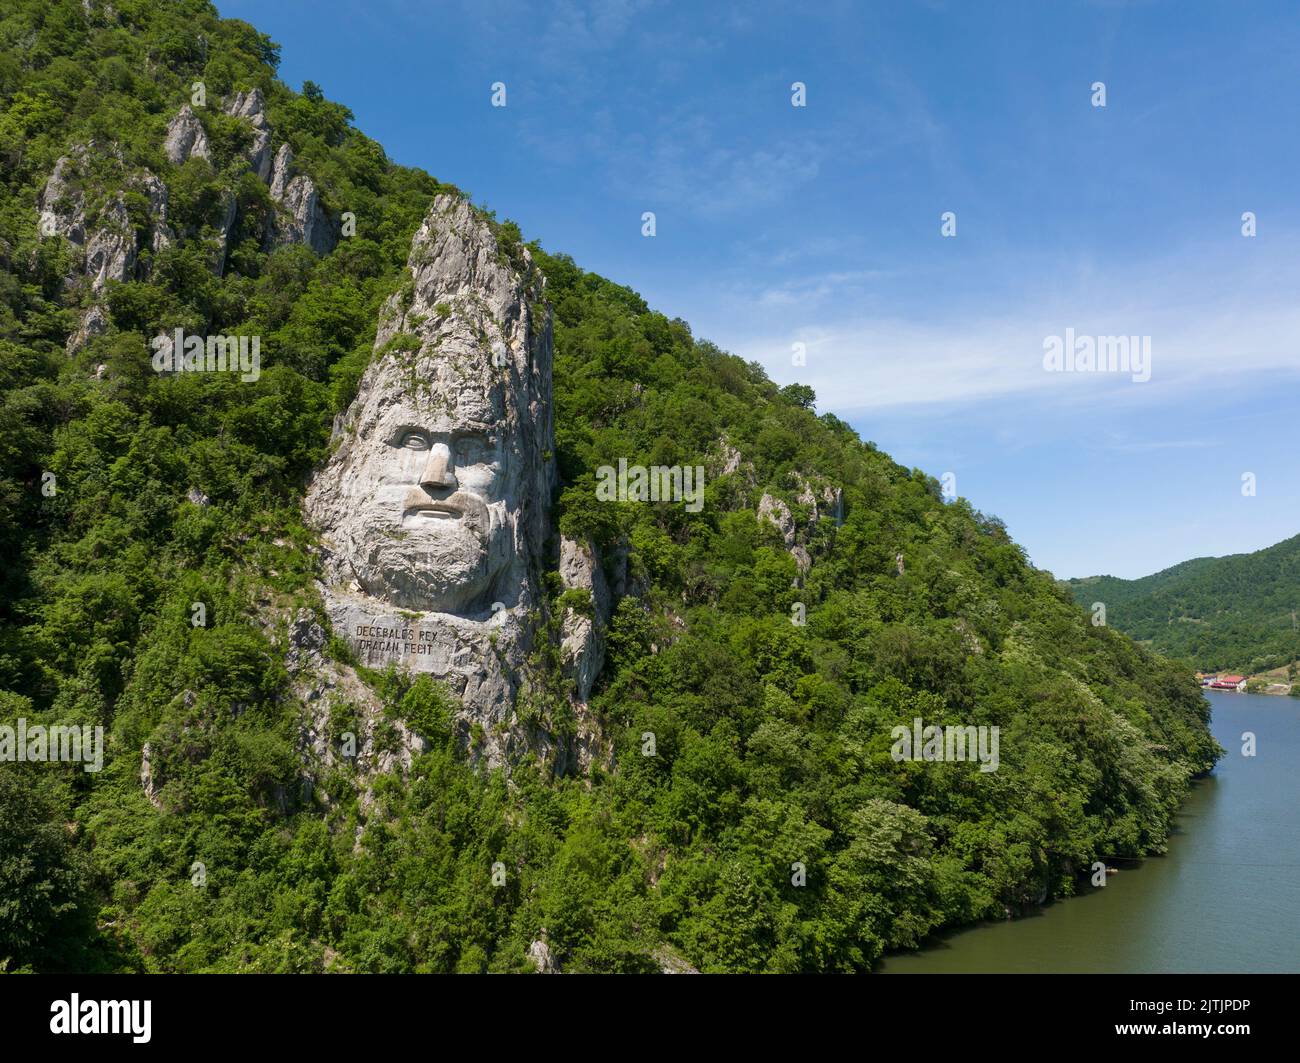 Sculpted Head of Decebal Dacian King, placed on the course of Danube River Stock Photo